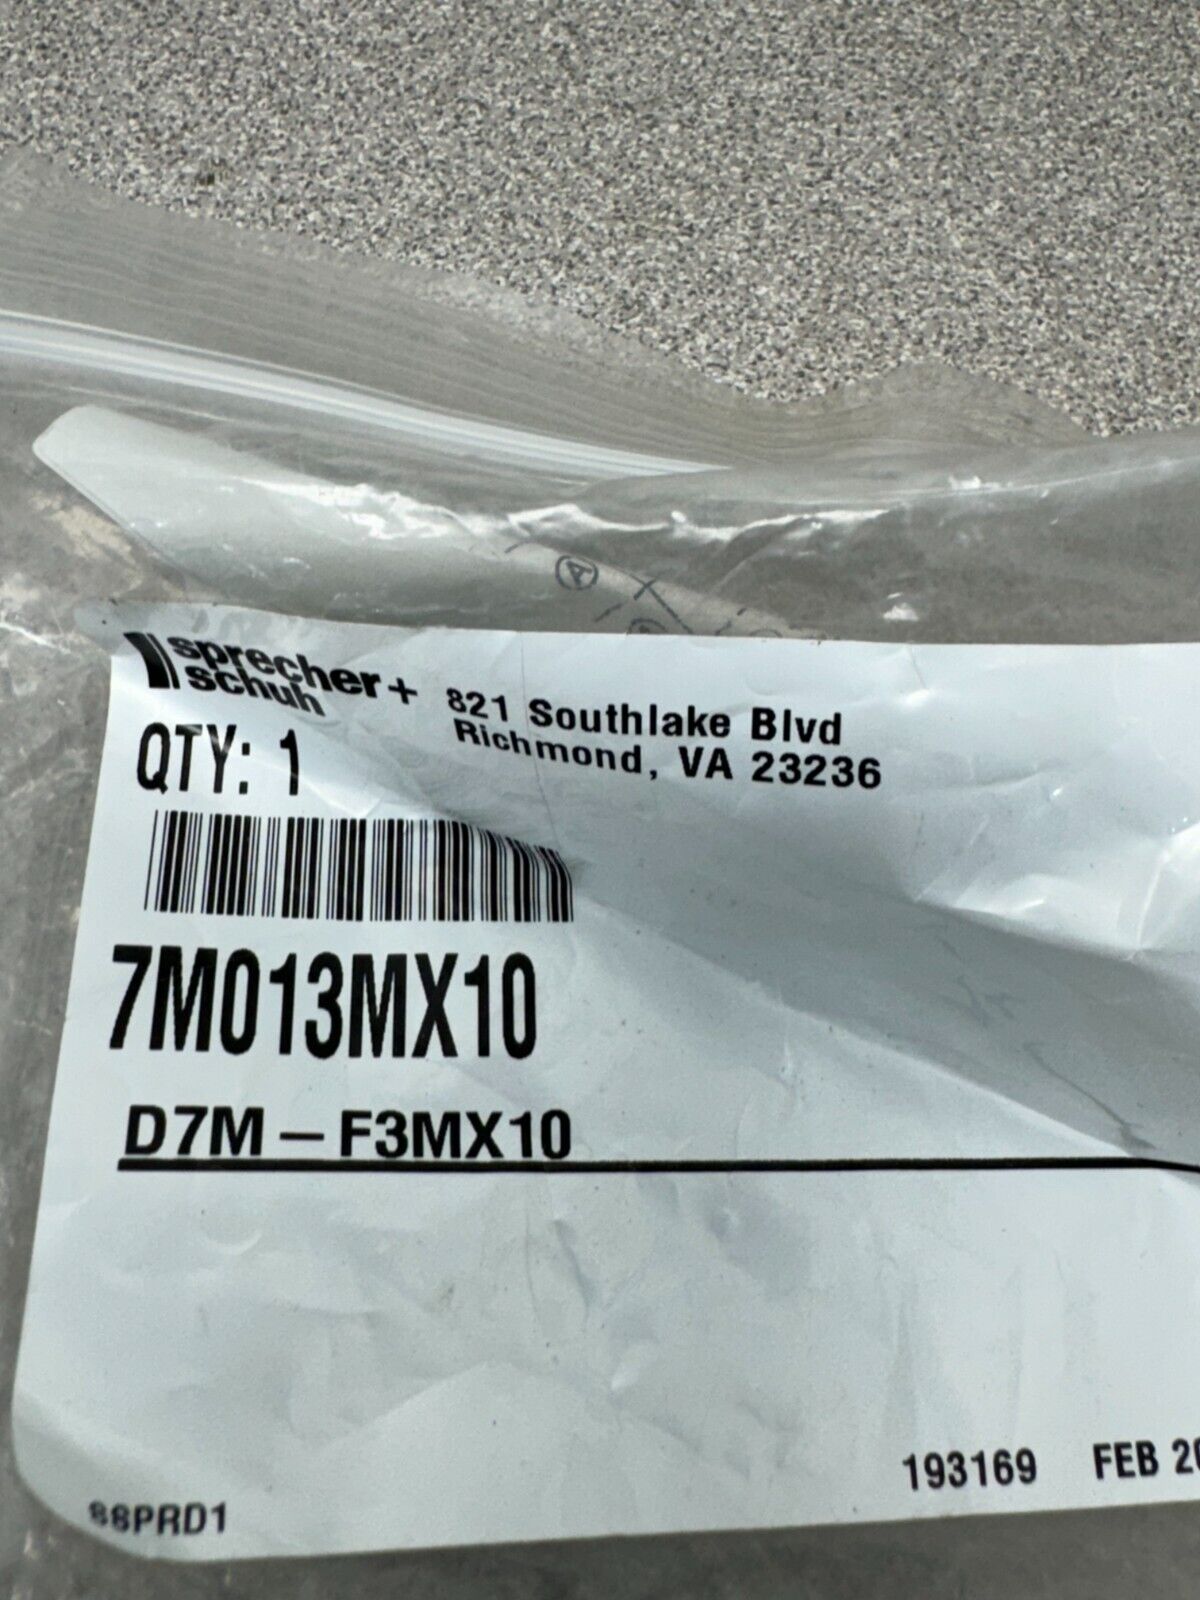 NEW IN PACKAGE SPRECHER SCHUH PUSH BUTTON SWITCH D7M-F3MX10